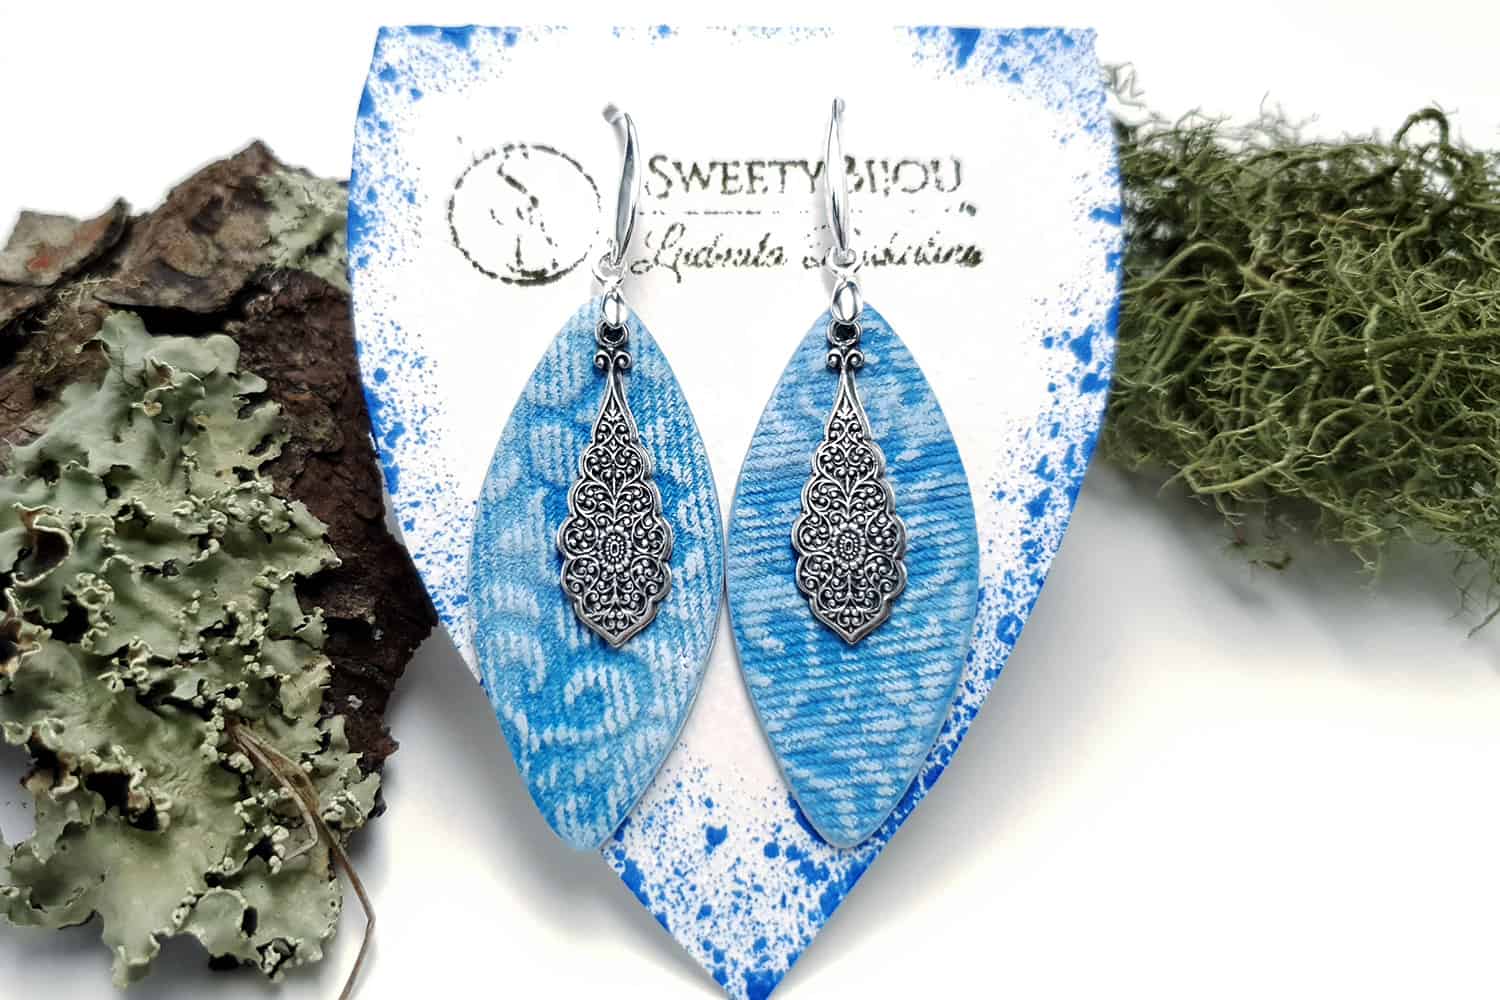 Jewelry from "Faux Jeans/Denim Fabric" course for your inspiration #14